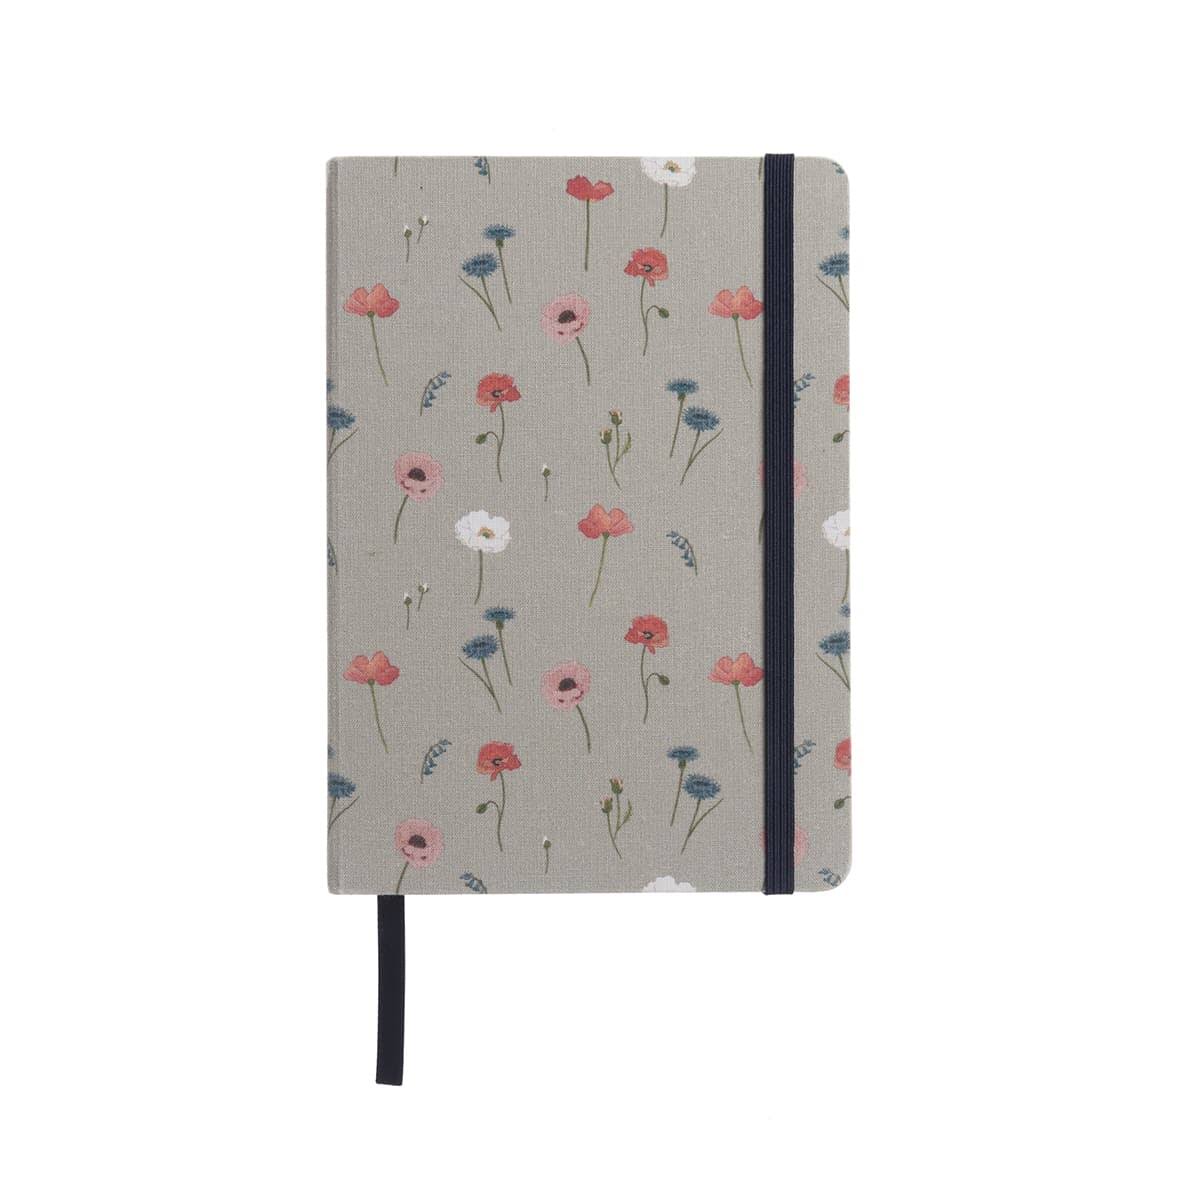 Poppy Meadow Small Notebook by Sophie Allport